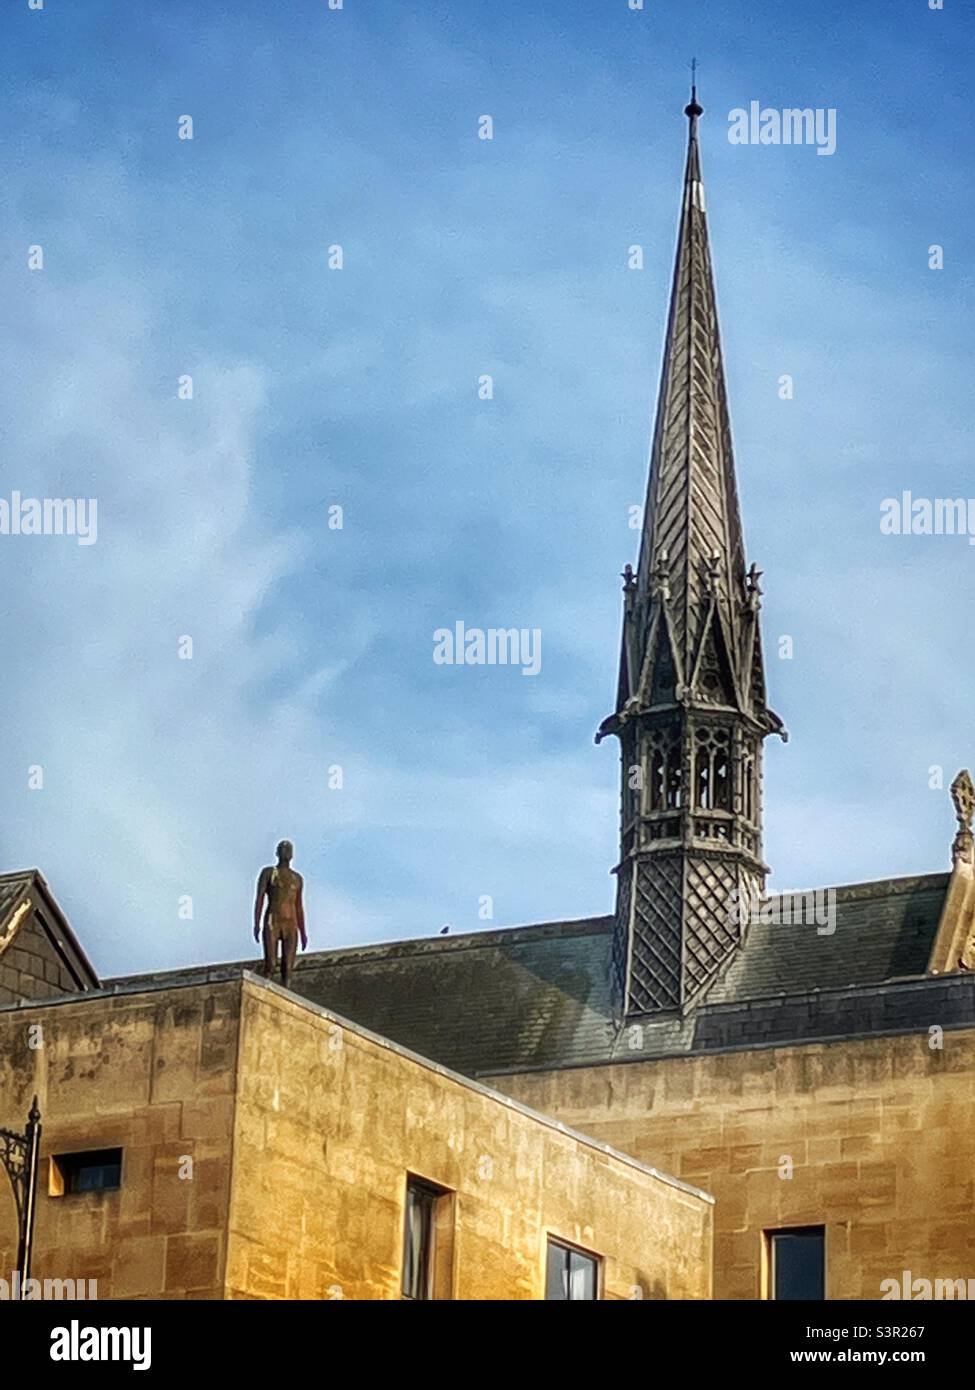 An Antony Gormley sculpture on the roof of Exeter College’s Thomas Wood building, Oxford, UK. Stock Photo